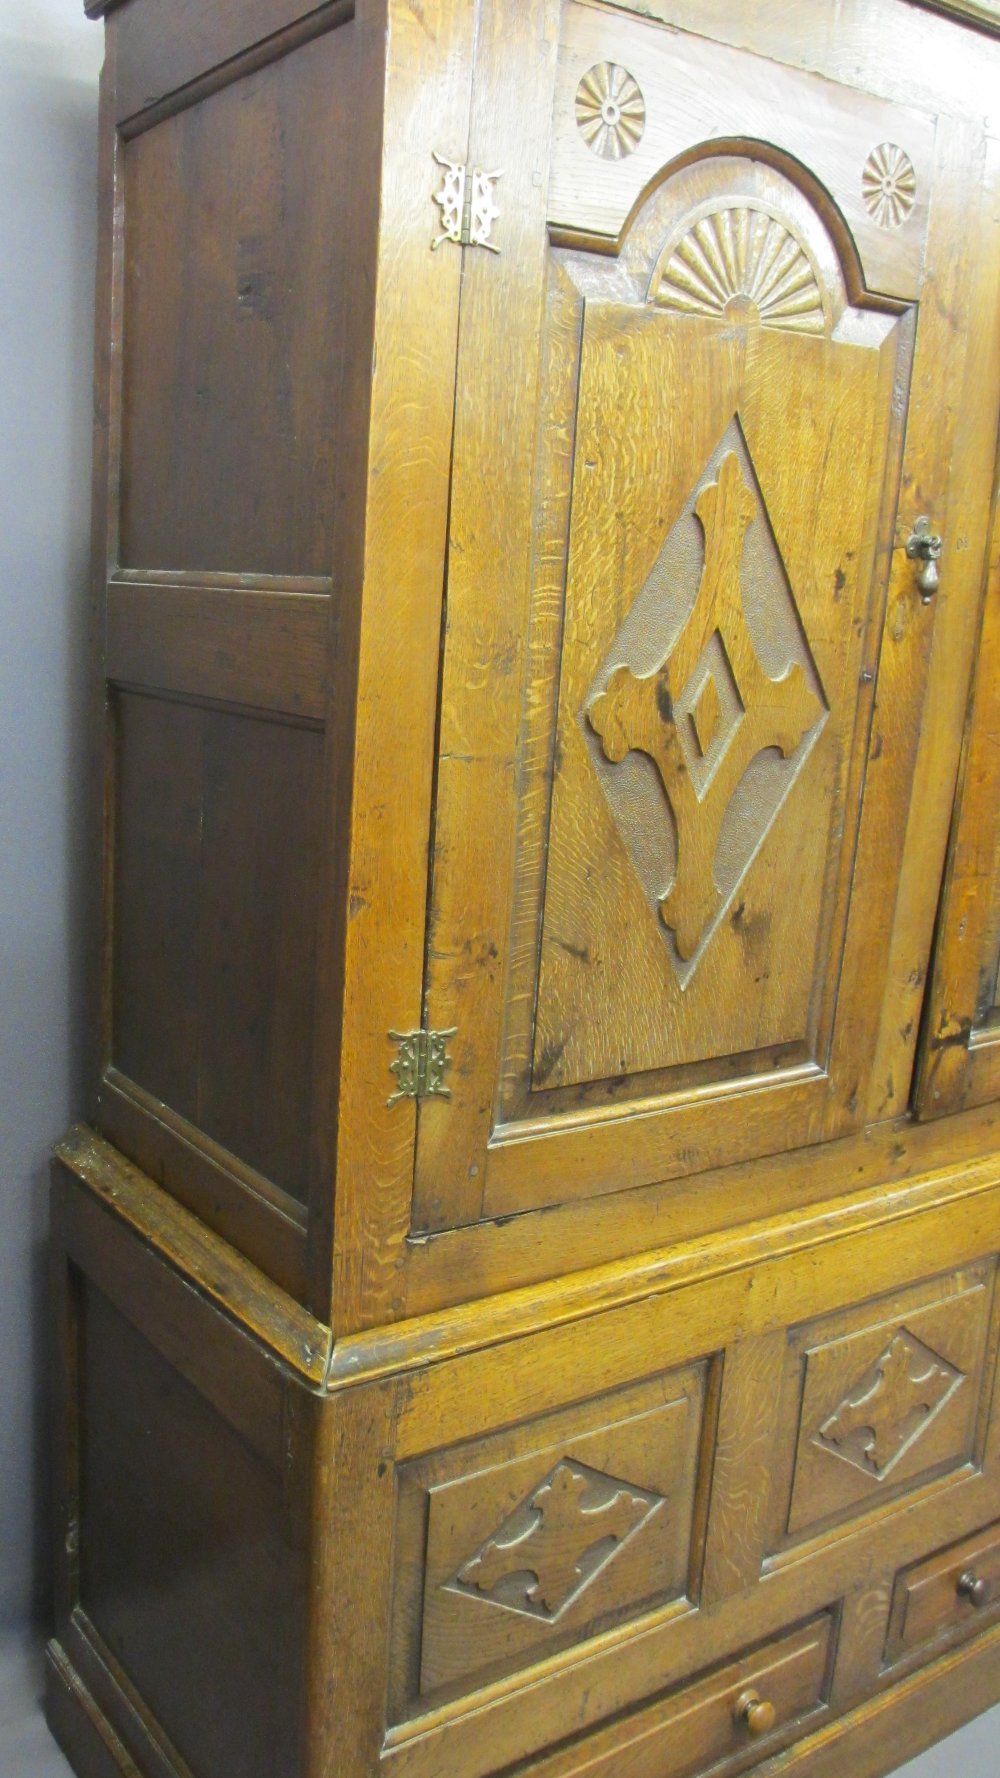 CIRCA 1800 CARVED OAK PRESS CUPBOARD with fan detail and Gothic type crosses on shaped and chamfered - Image 4 of 7